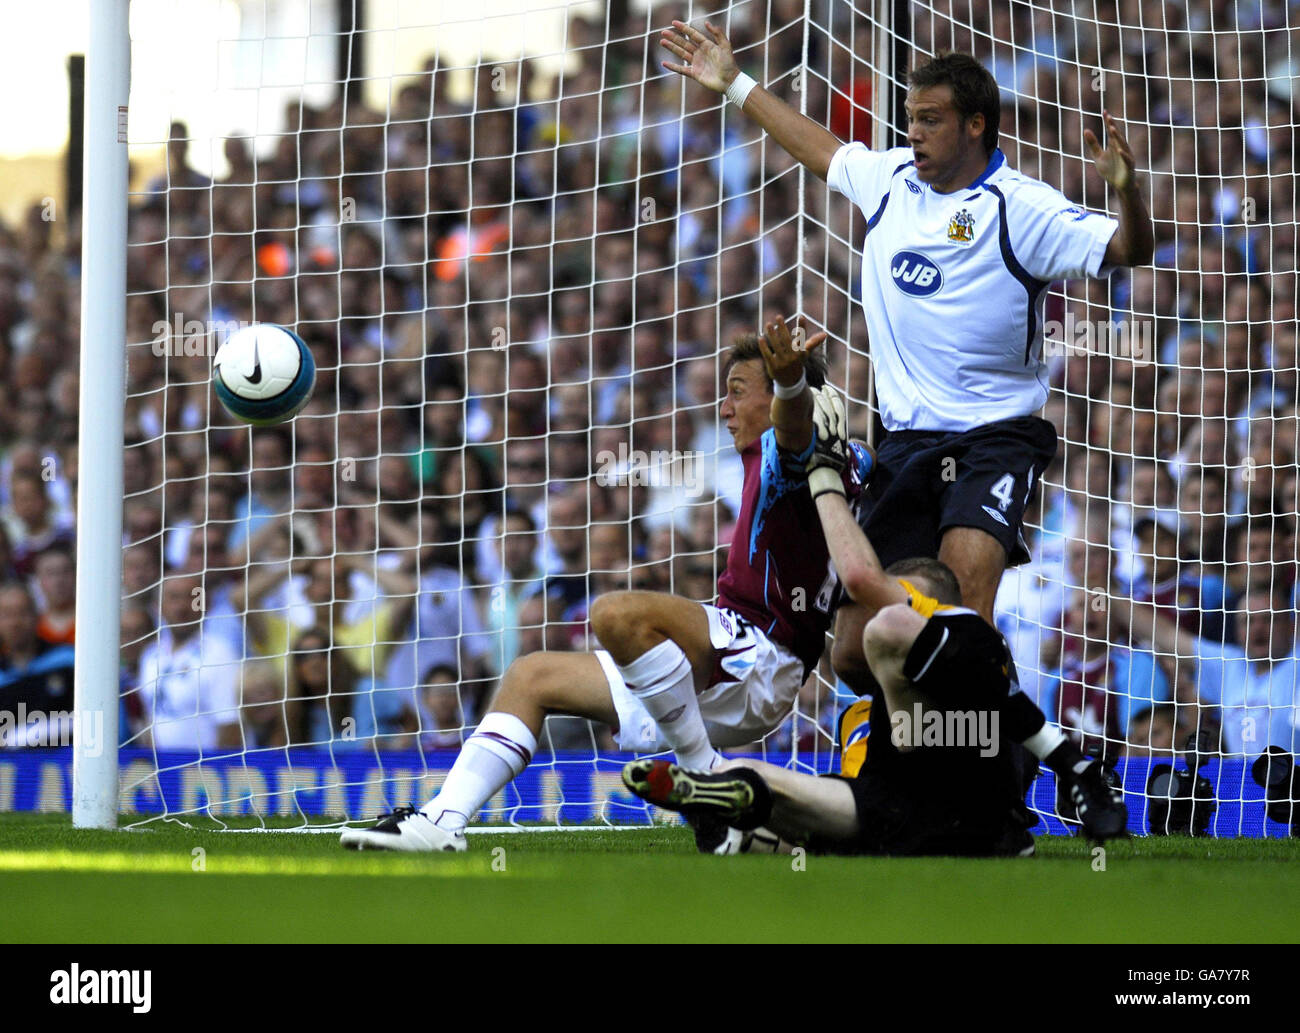 Soccer - Barclays Premier League - West Ham United v Wigan Athletic - Upton Park. West Ham's Mark Noble (left) is brought down by Wigan keeper Chris Kirkland during the Barclays Premier League match at Upton Park, London. Stock Photo